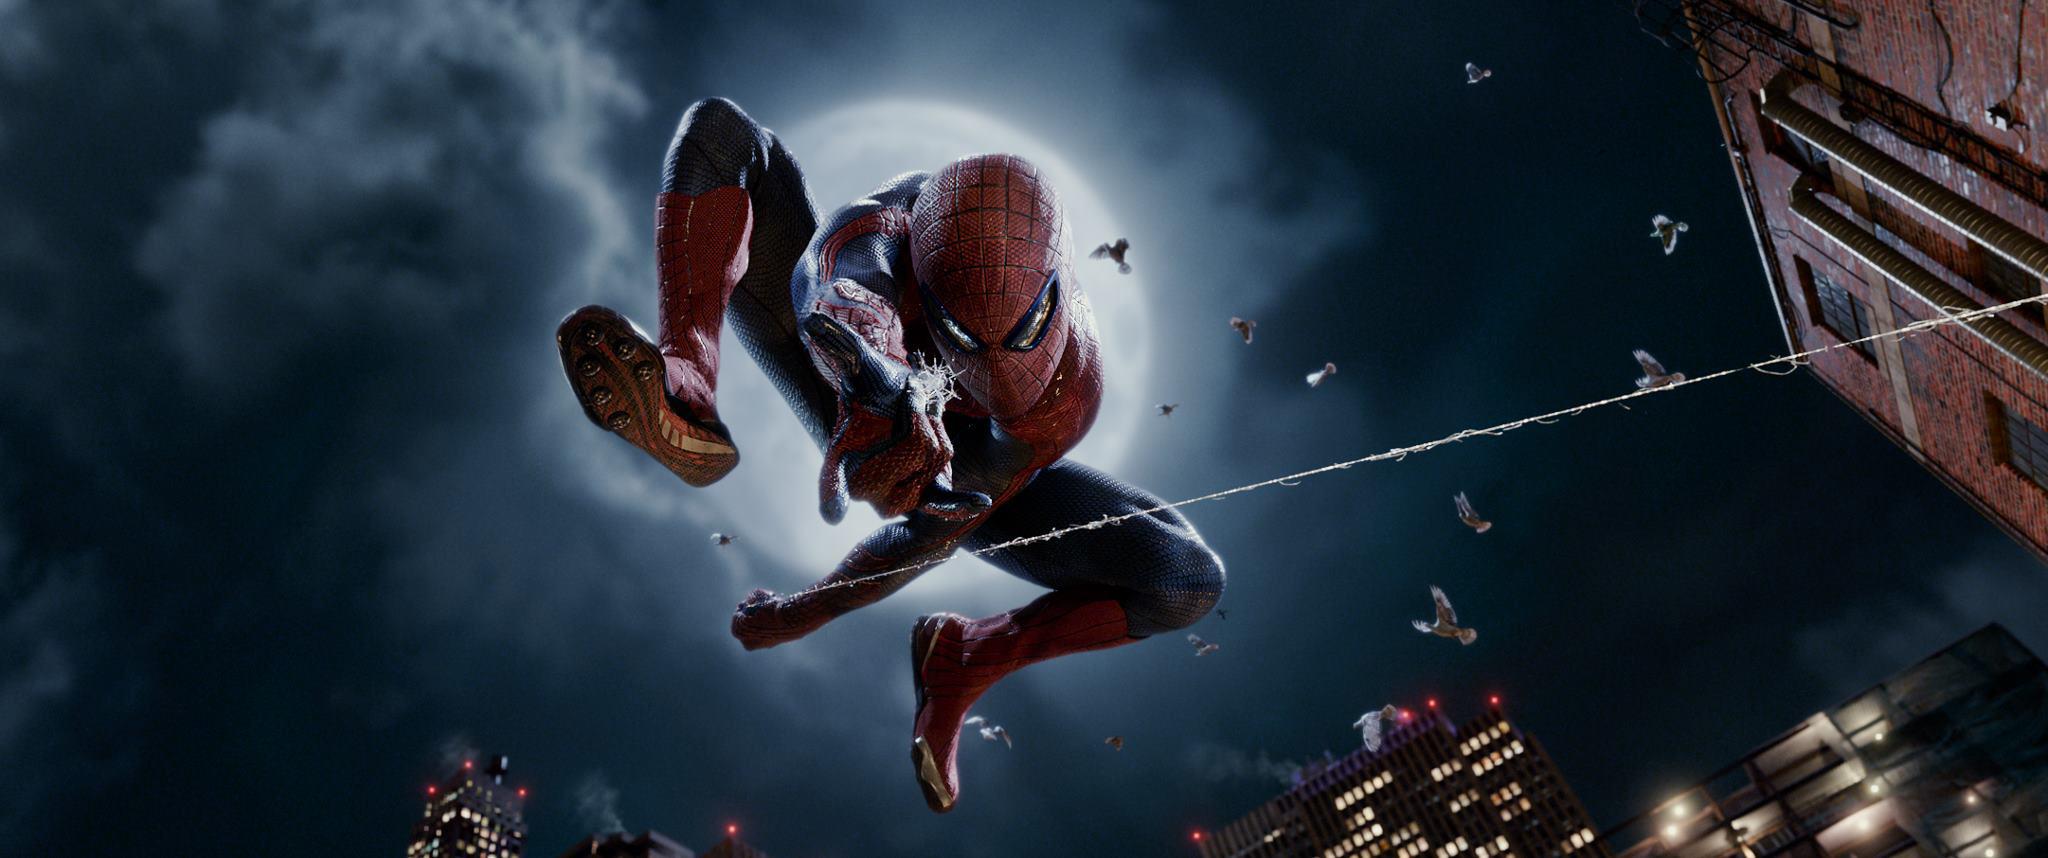 The Amazing Spider Man wallpaper, Video Game, HQ